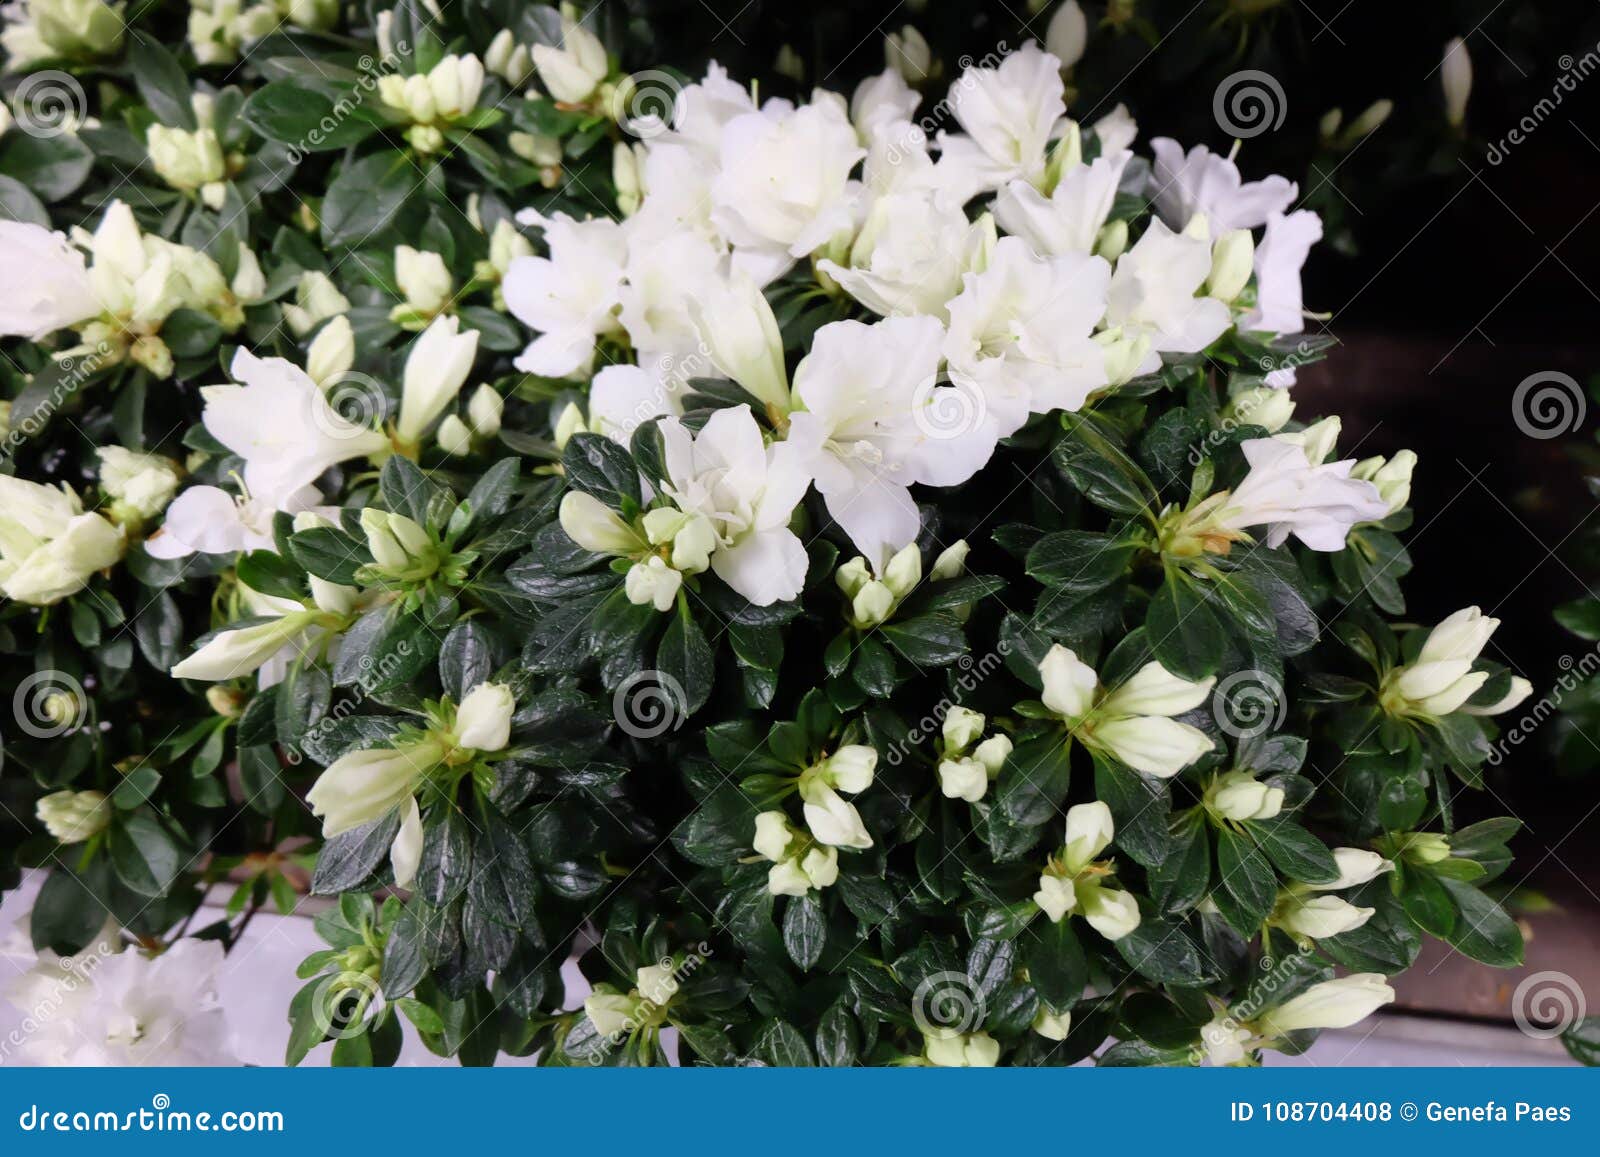 Gardenia Flowers Also Known As Saint Anthony S Flowers Stock Photo Image Of Outdoor Wedding 108704408